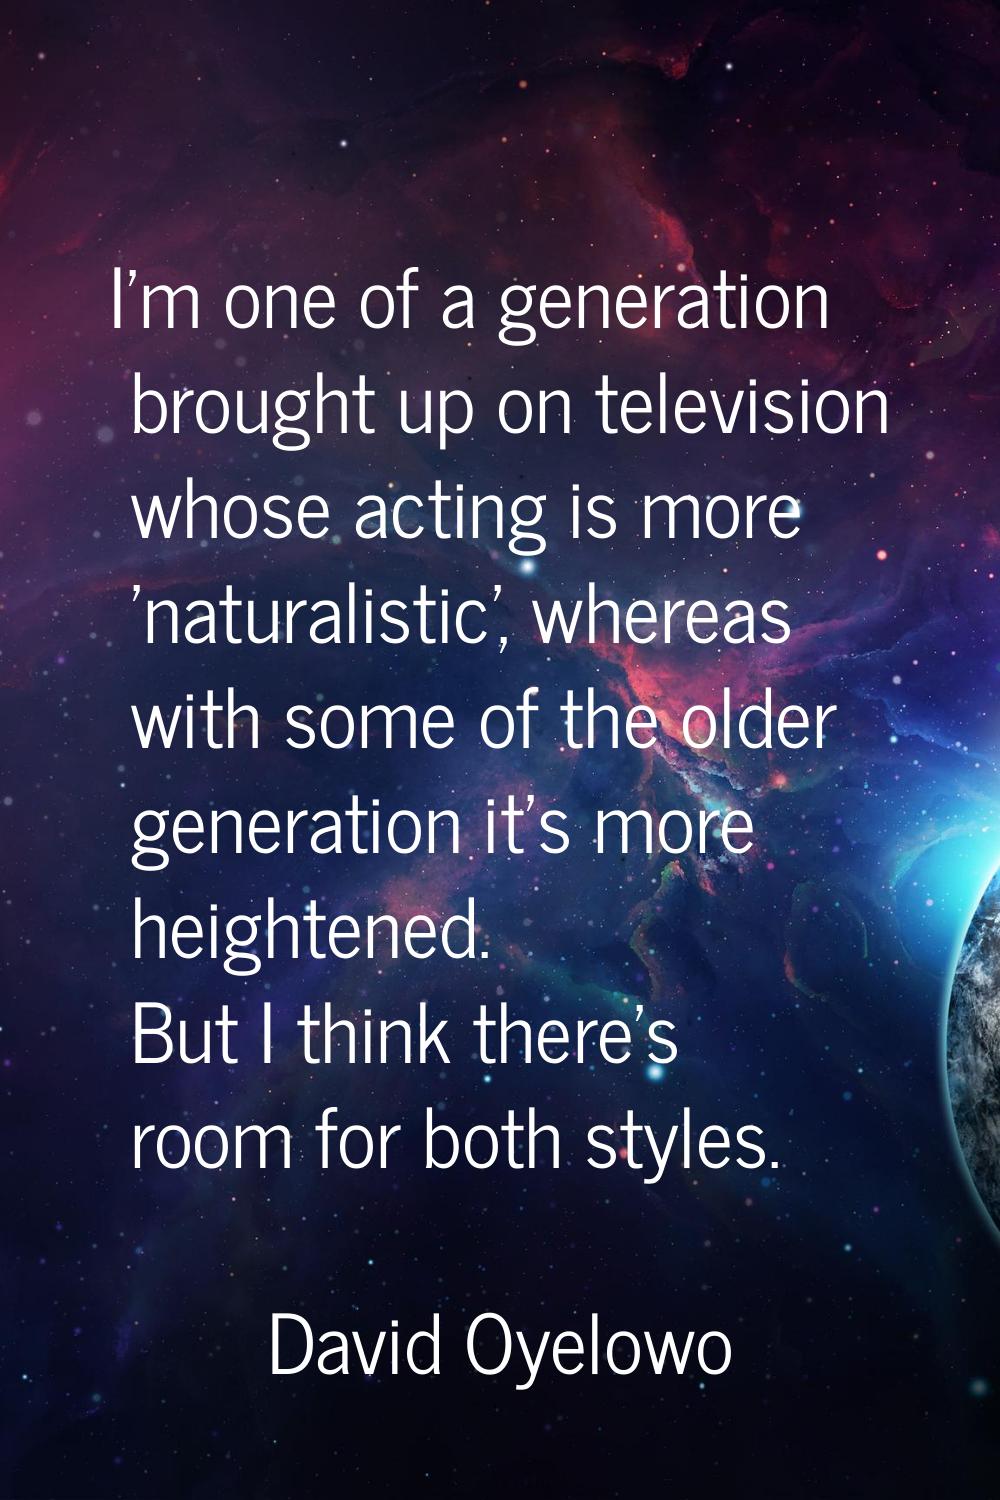 I'm one of a generation brought up on television whose acting is more 'naturalistic', whereas with 